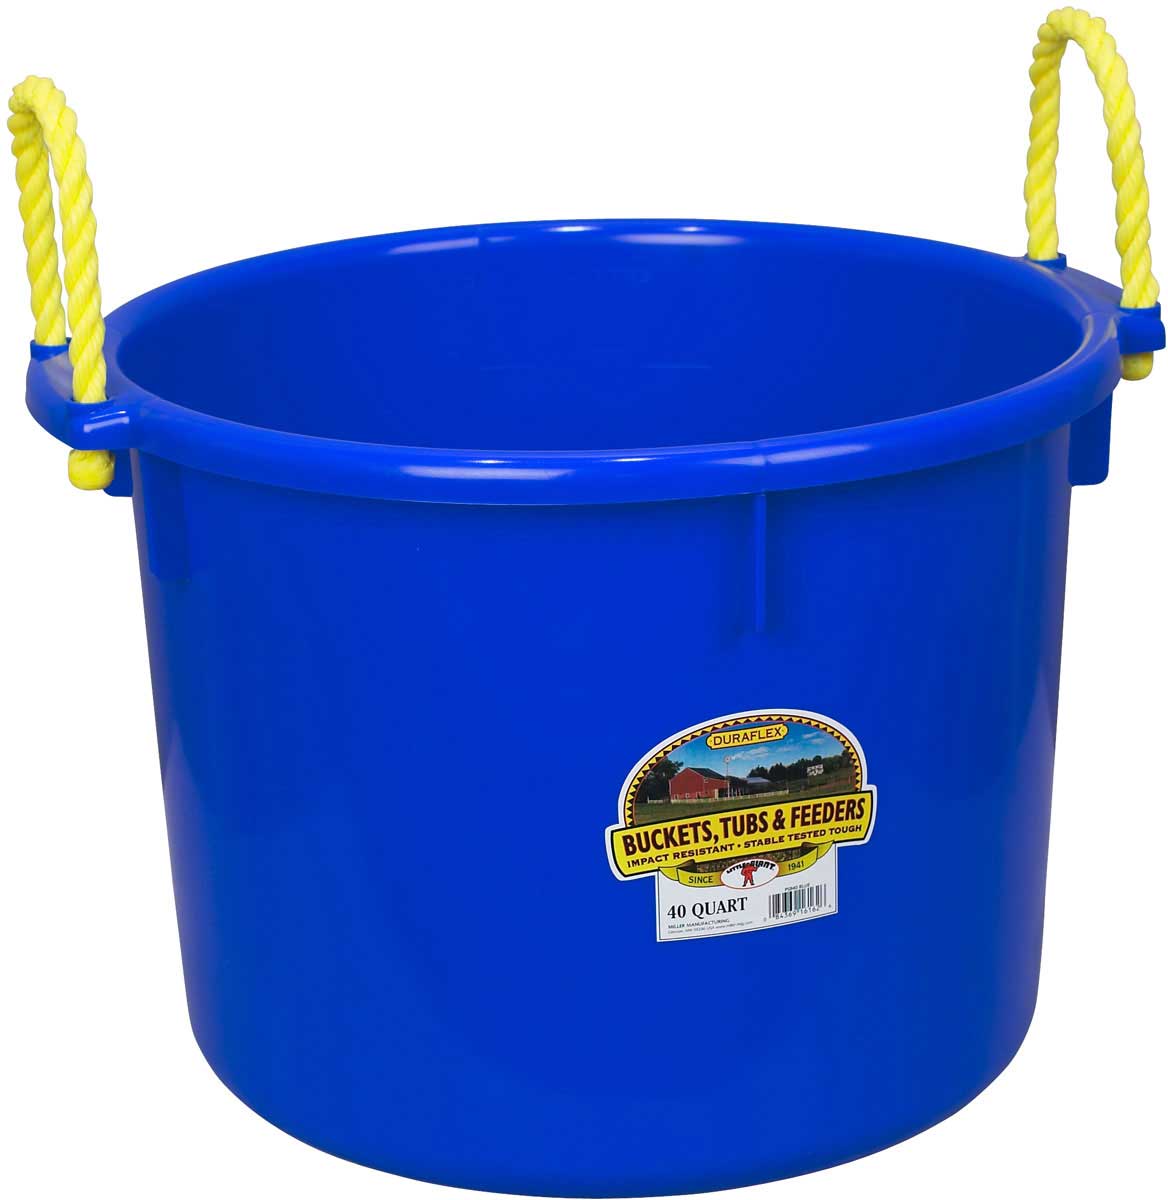 Red Little Giant Plastic Muck Tub Item No. PSB40RED 40 Quart Durable & Versatile Utility Bucket with Handles 